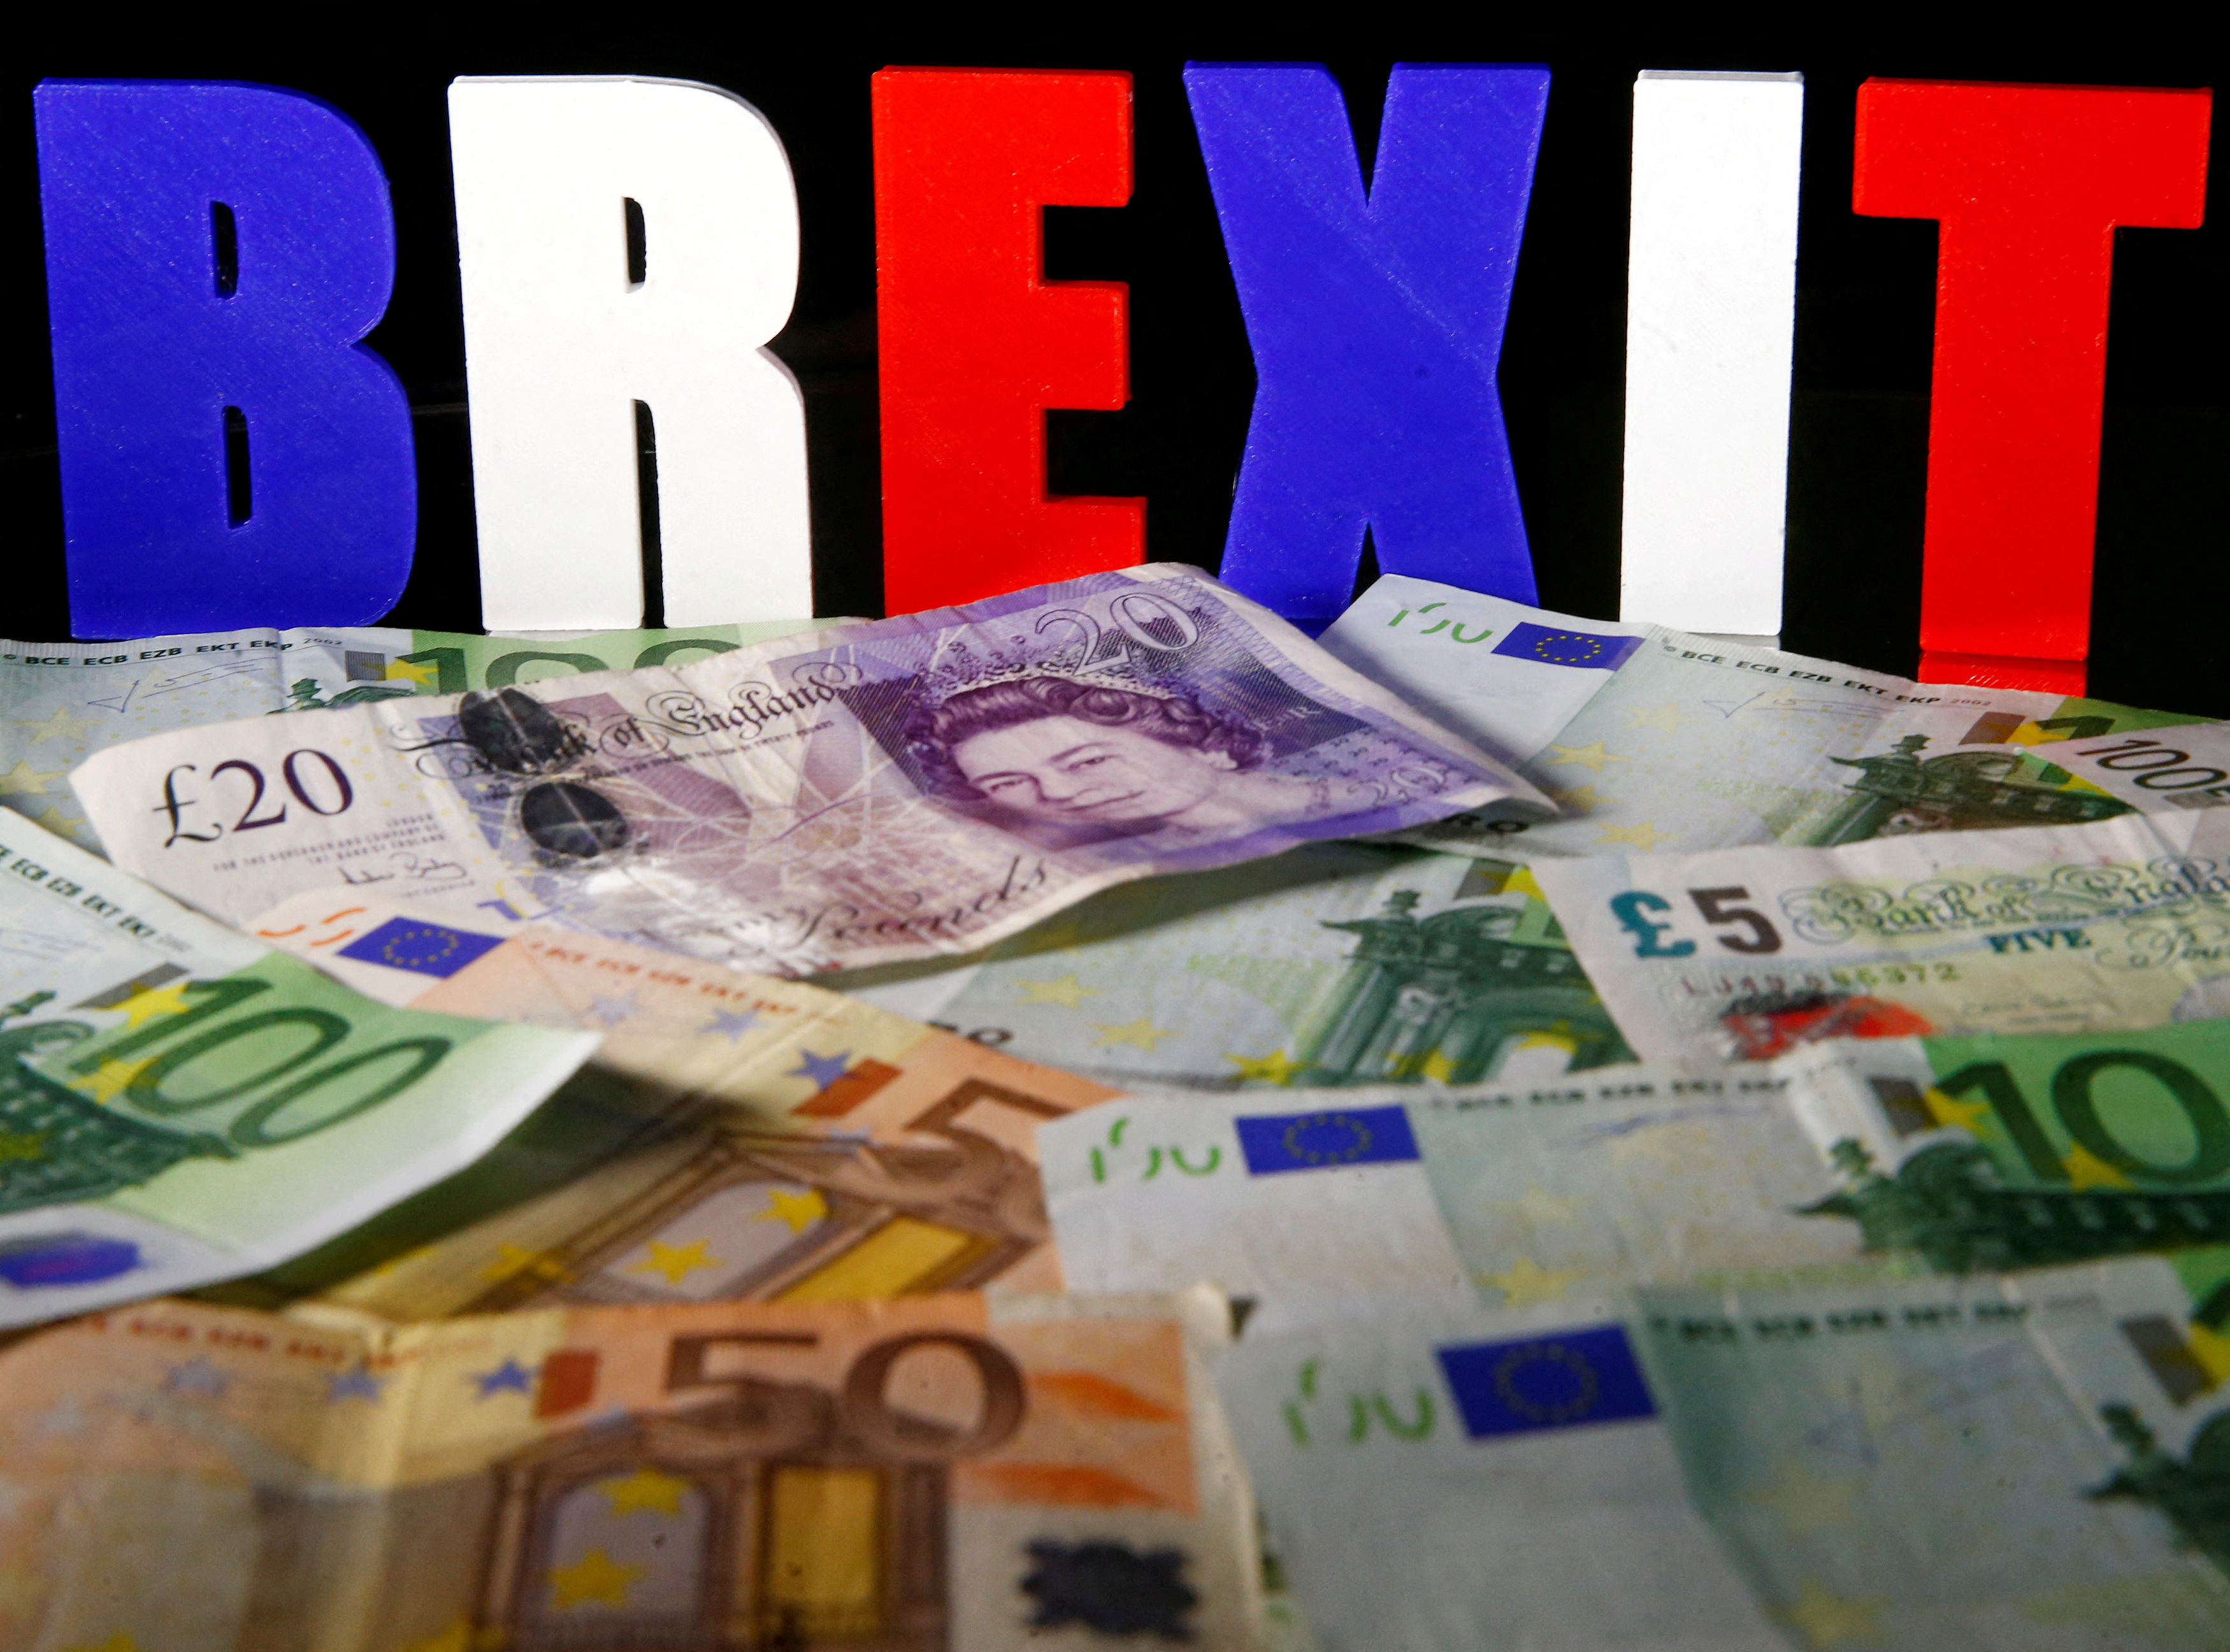 Euro and Pound banknotes are seen in front of BREXIT letters in this picture illustration